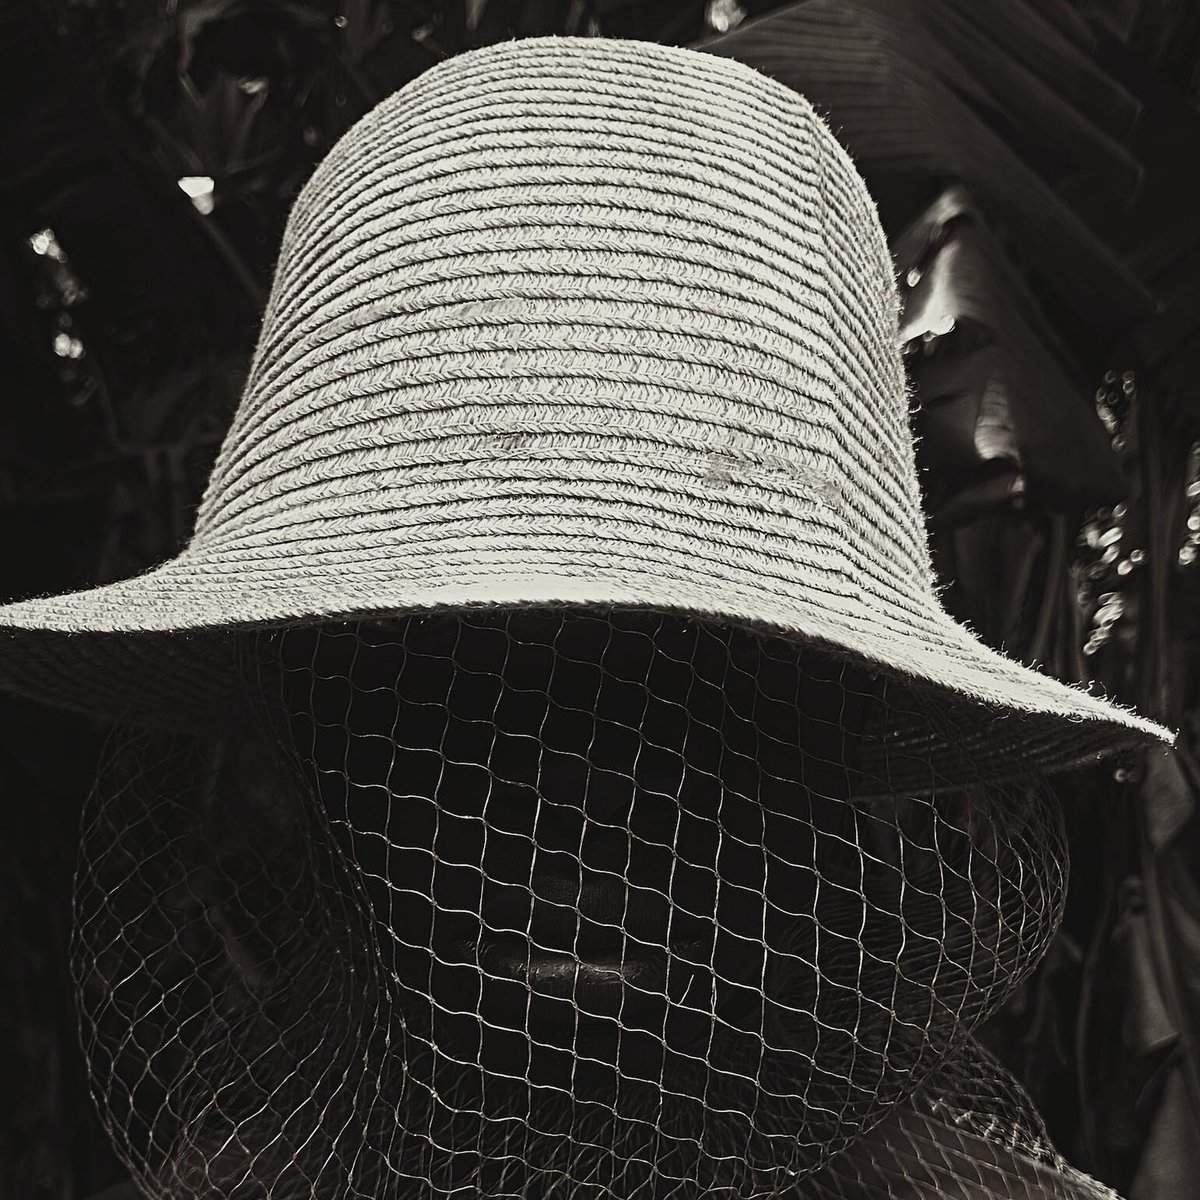 Person in Protective Net and Straw Hat